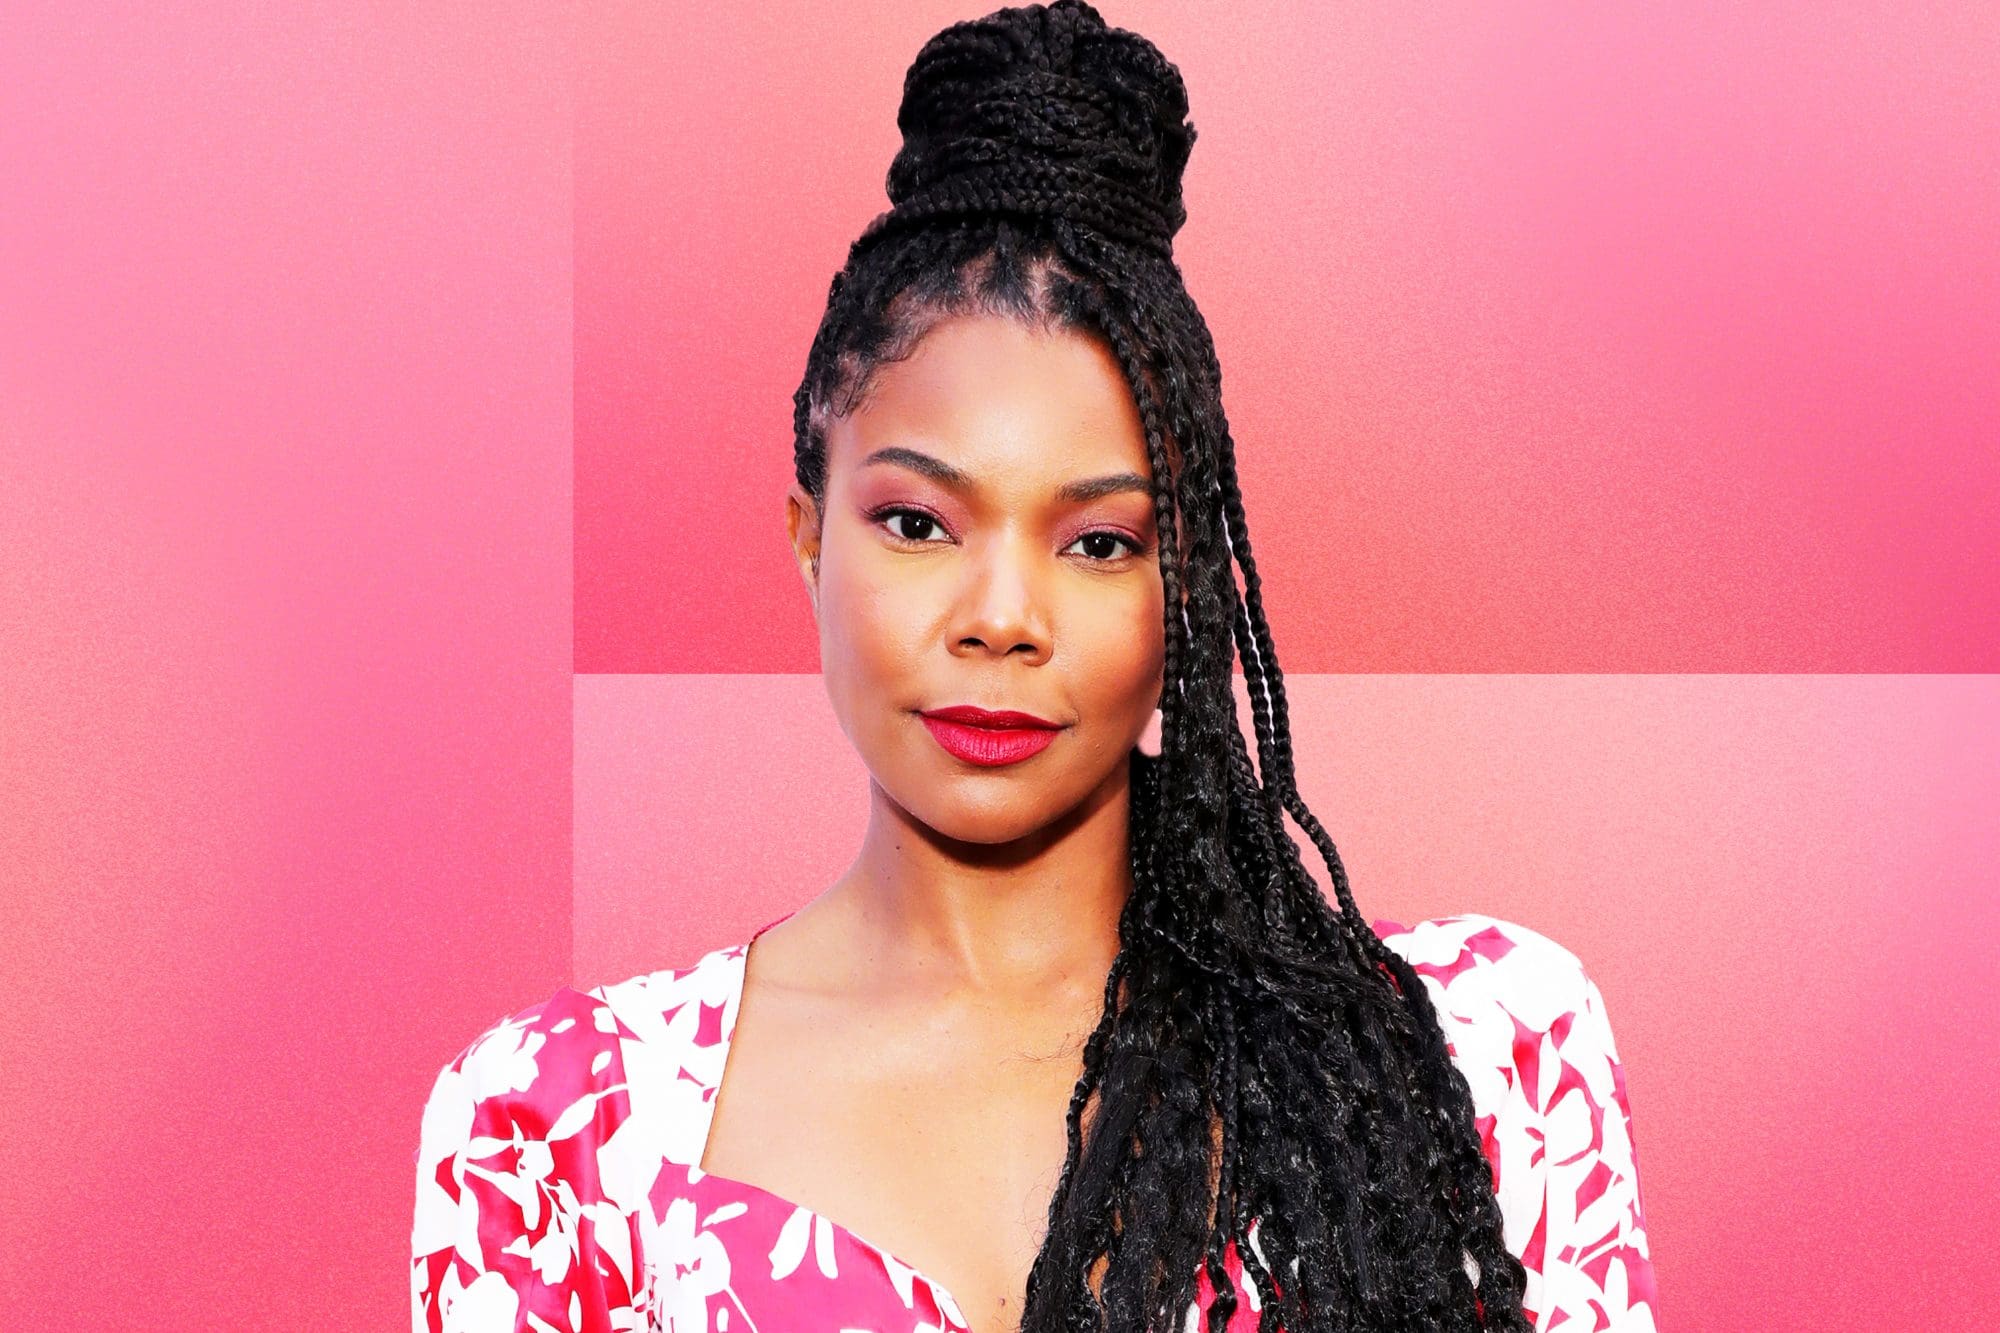 ”gabrielle-union-drops-juicy-beauty-advice-check-out-her-post-here”